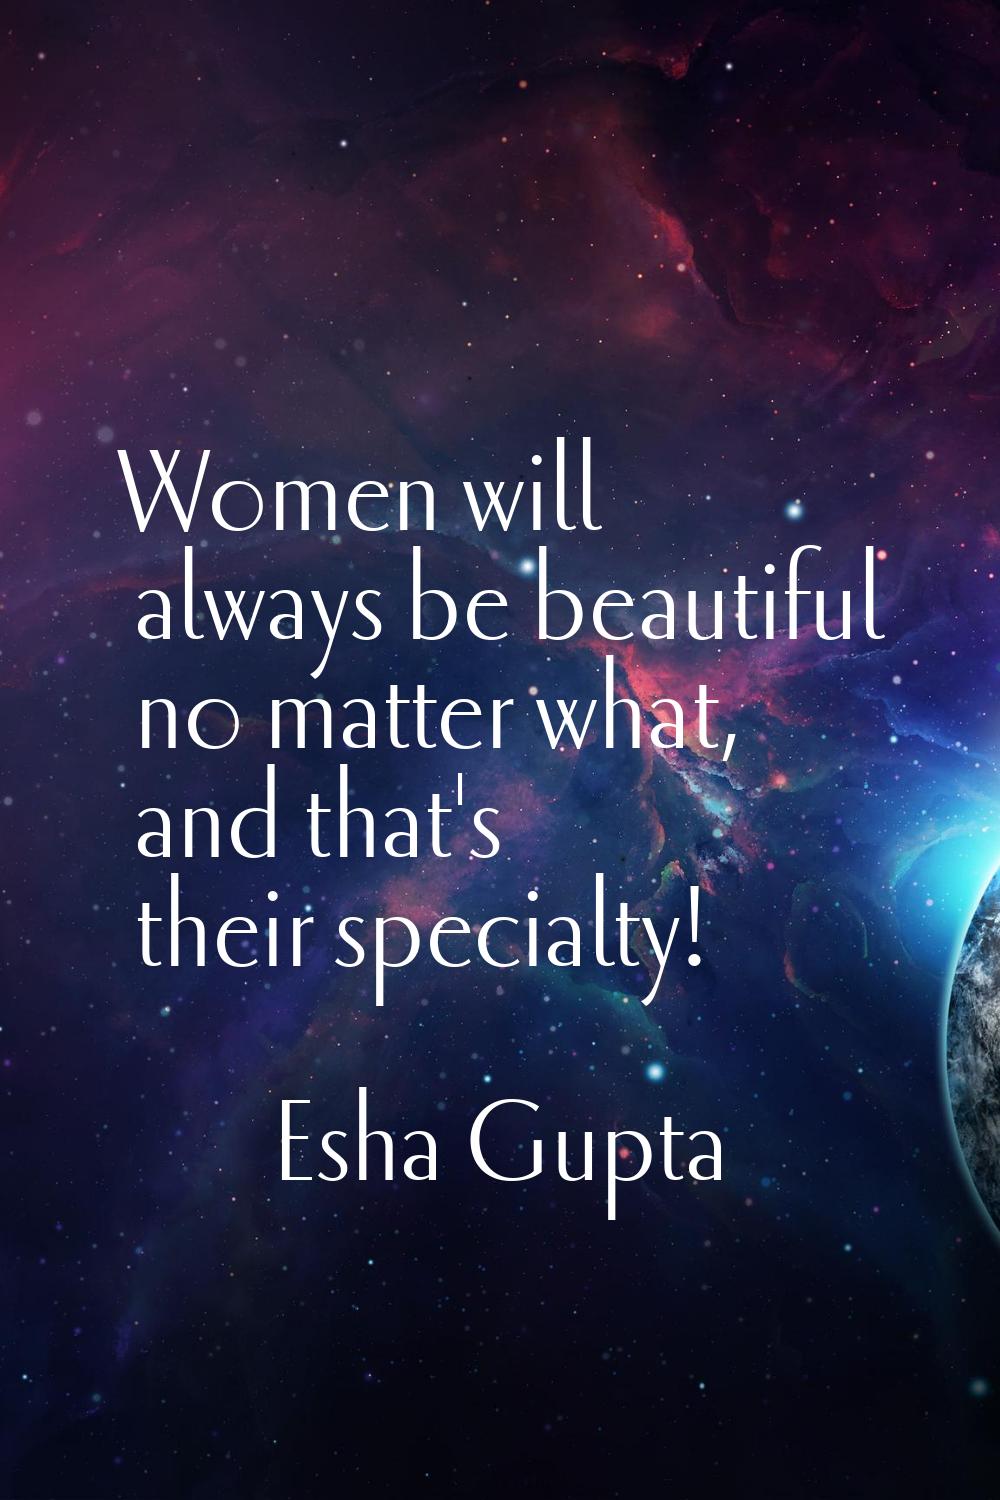 Women will always be beautiful no matter what, and that's their specialty!